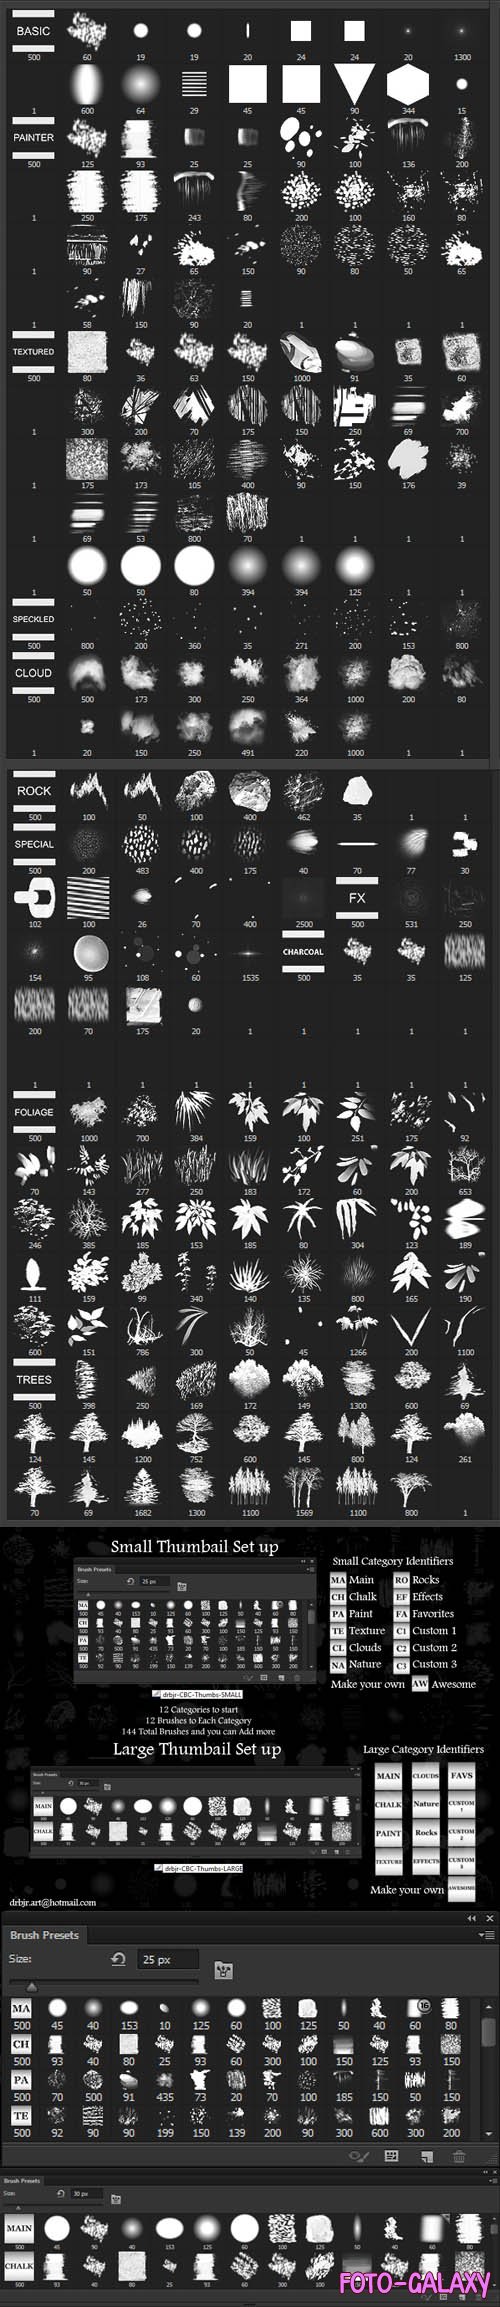 300+ Brushes Collection for Photoshop